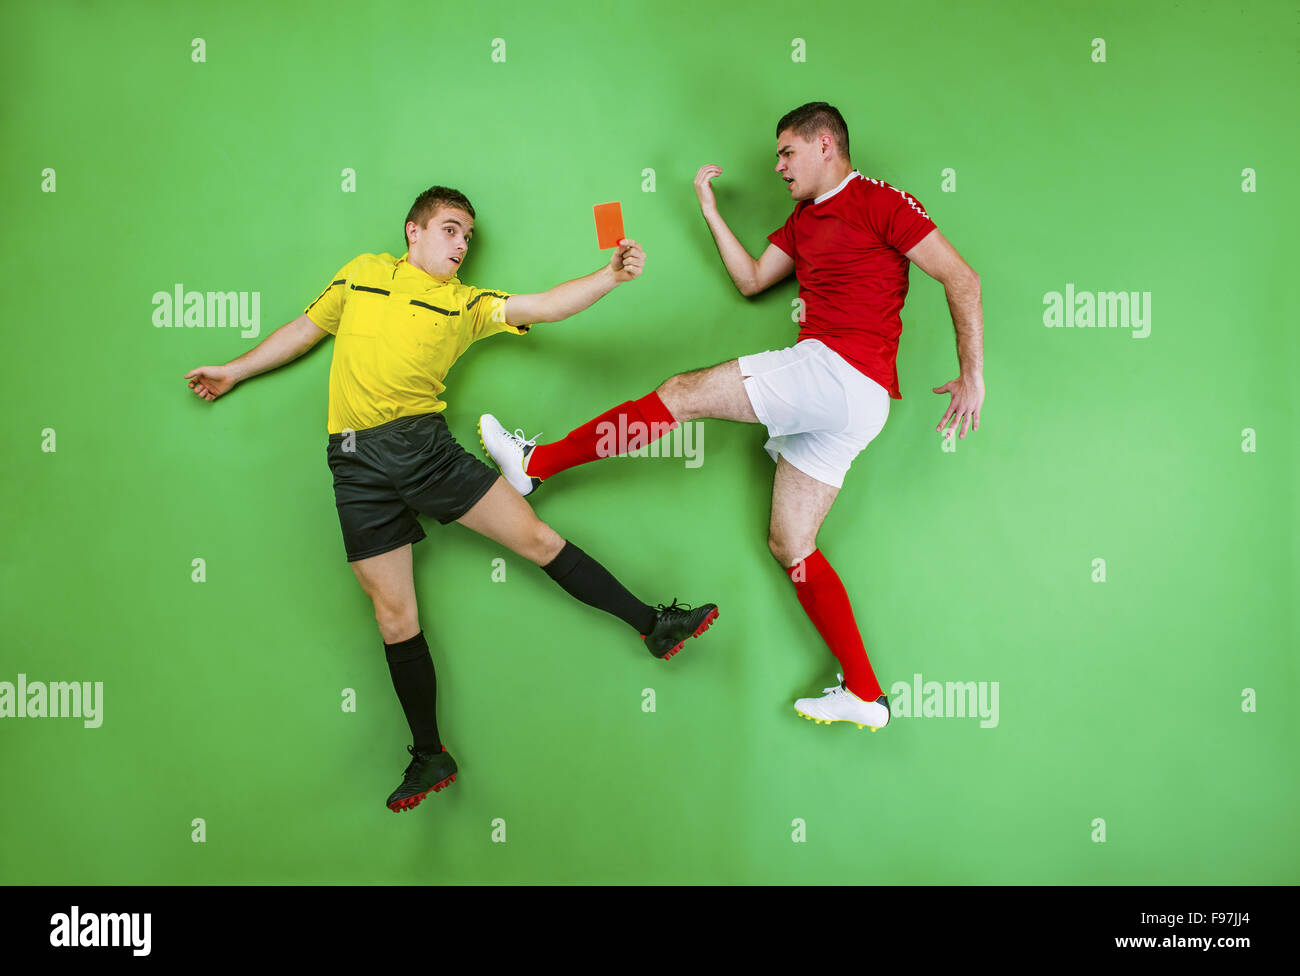 Referee giving red card to a football player. Studio shot on a green background. Stock Photo